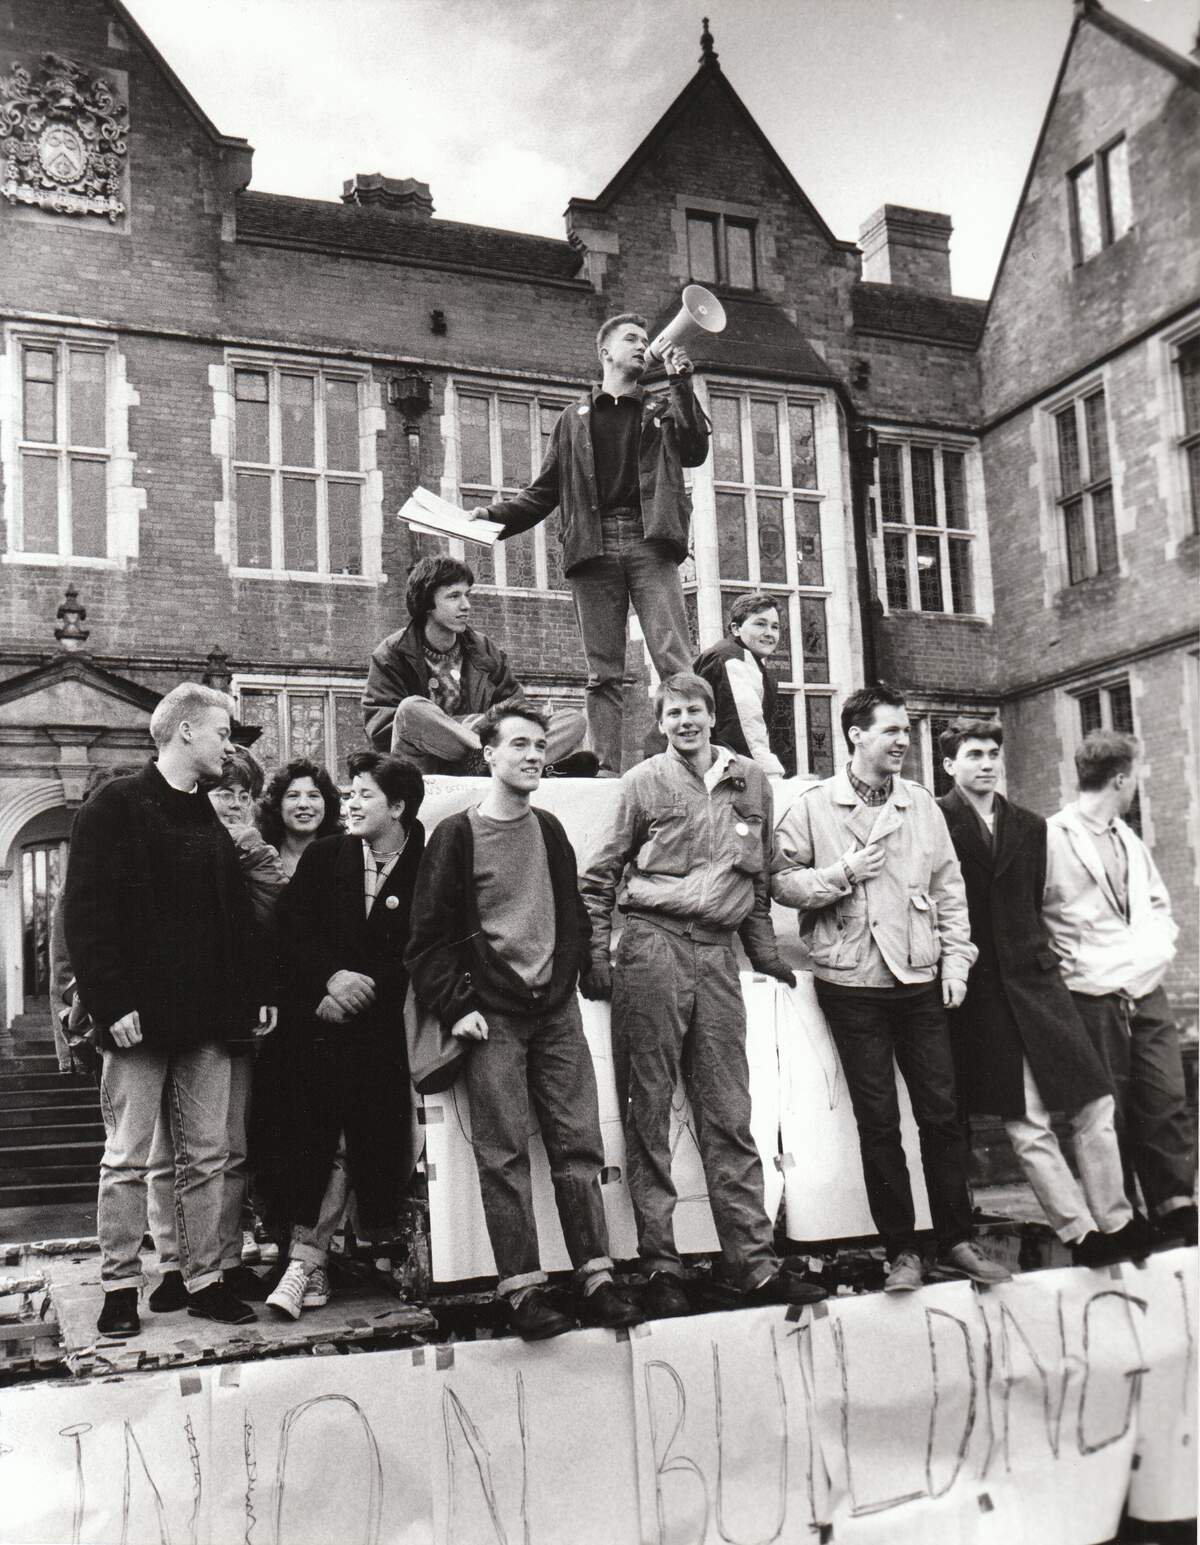 Students campaign for Student Union building, 1988